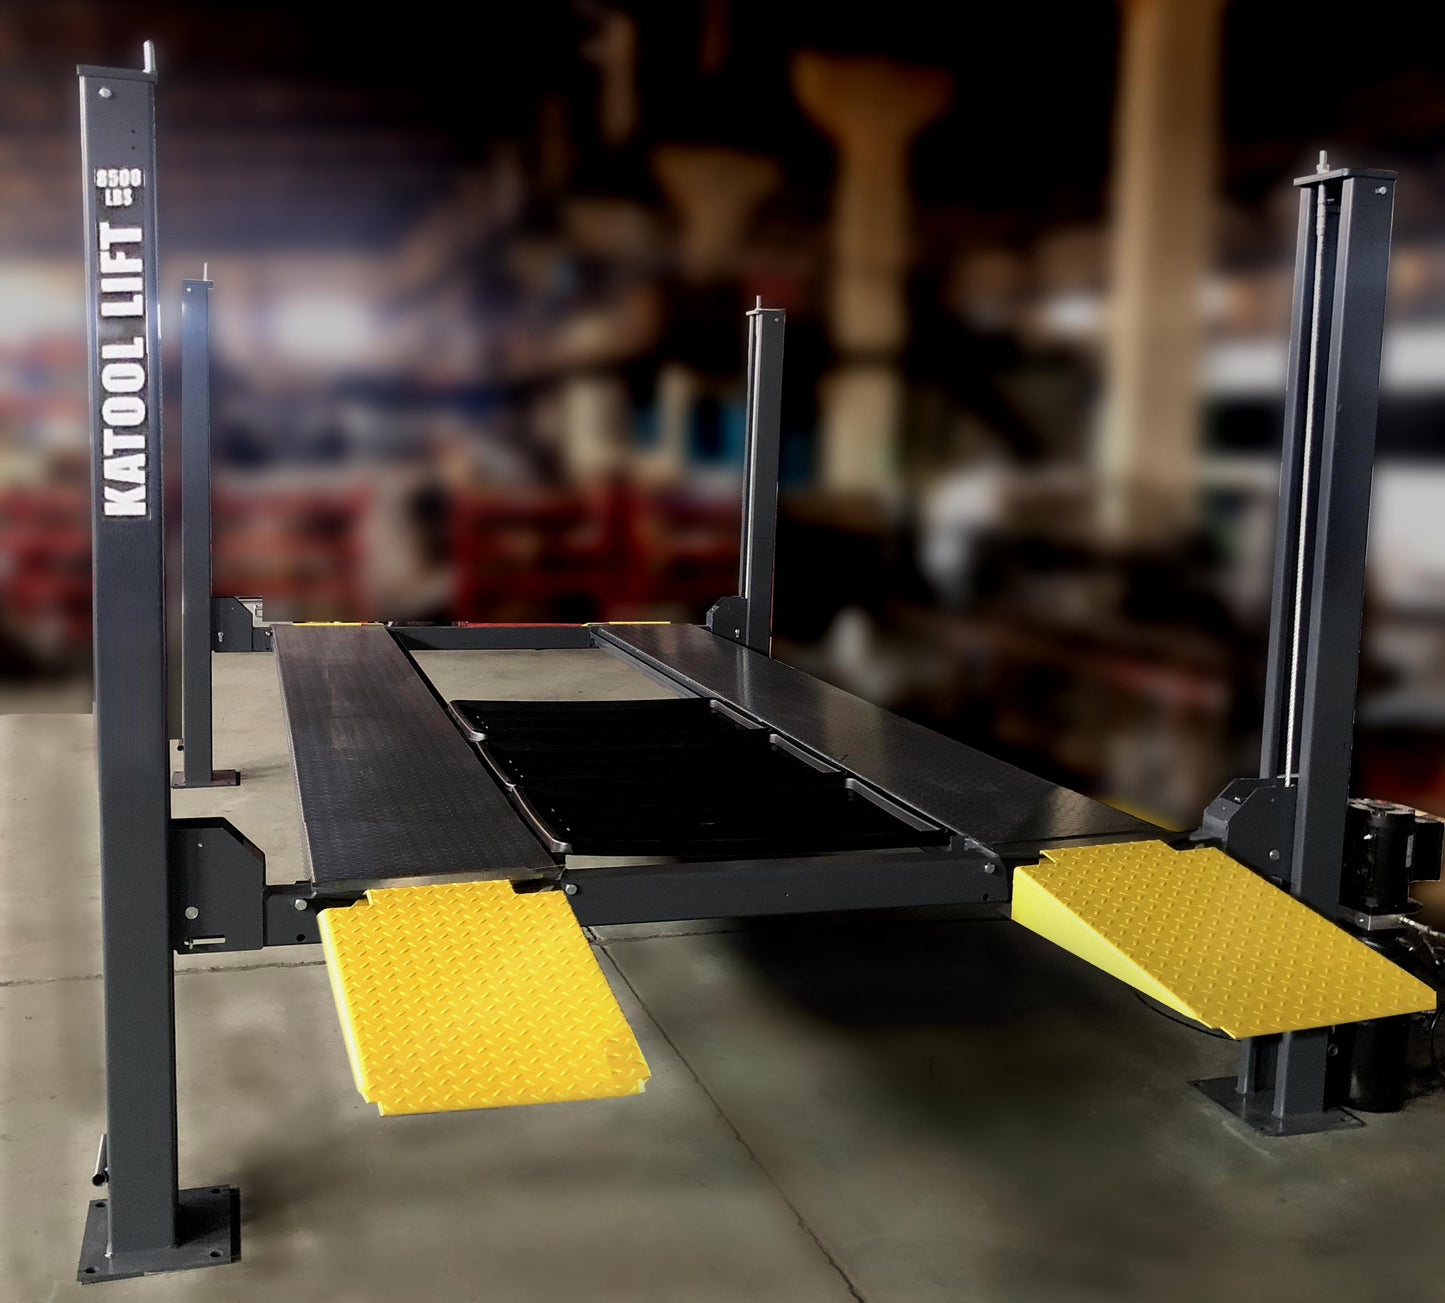 KT-4H850 8,500Lbs Heavy Duty 4-Post Car lift *Shipping included*